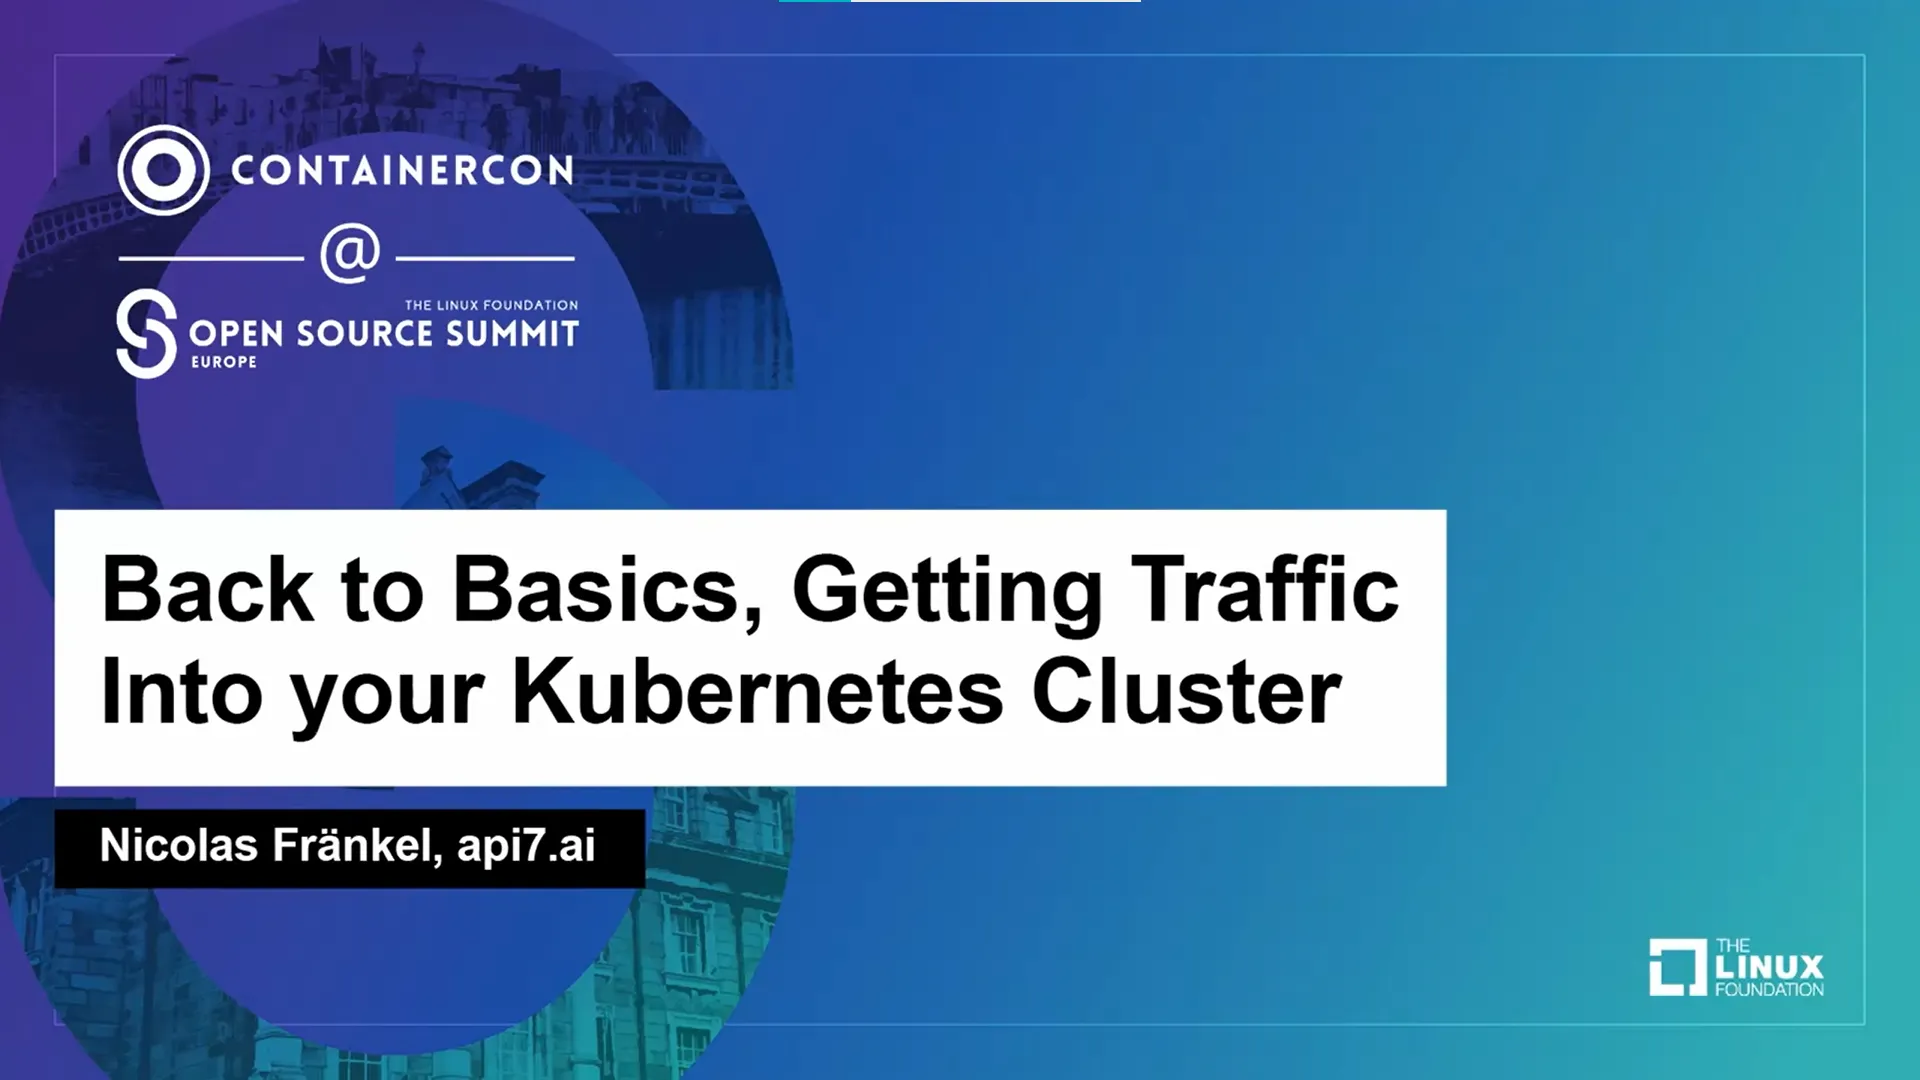 Nicolas at Open Source Summit Europe, on how to get traffic into Kubernetes cluster